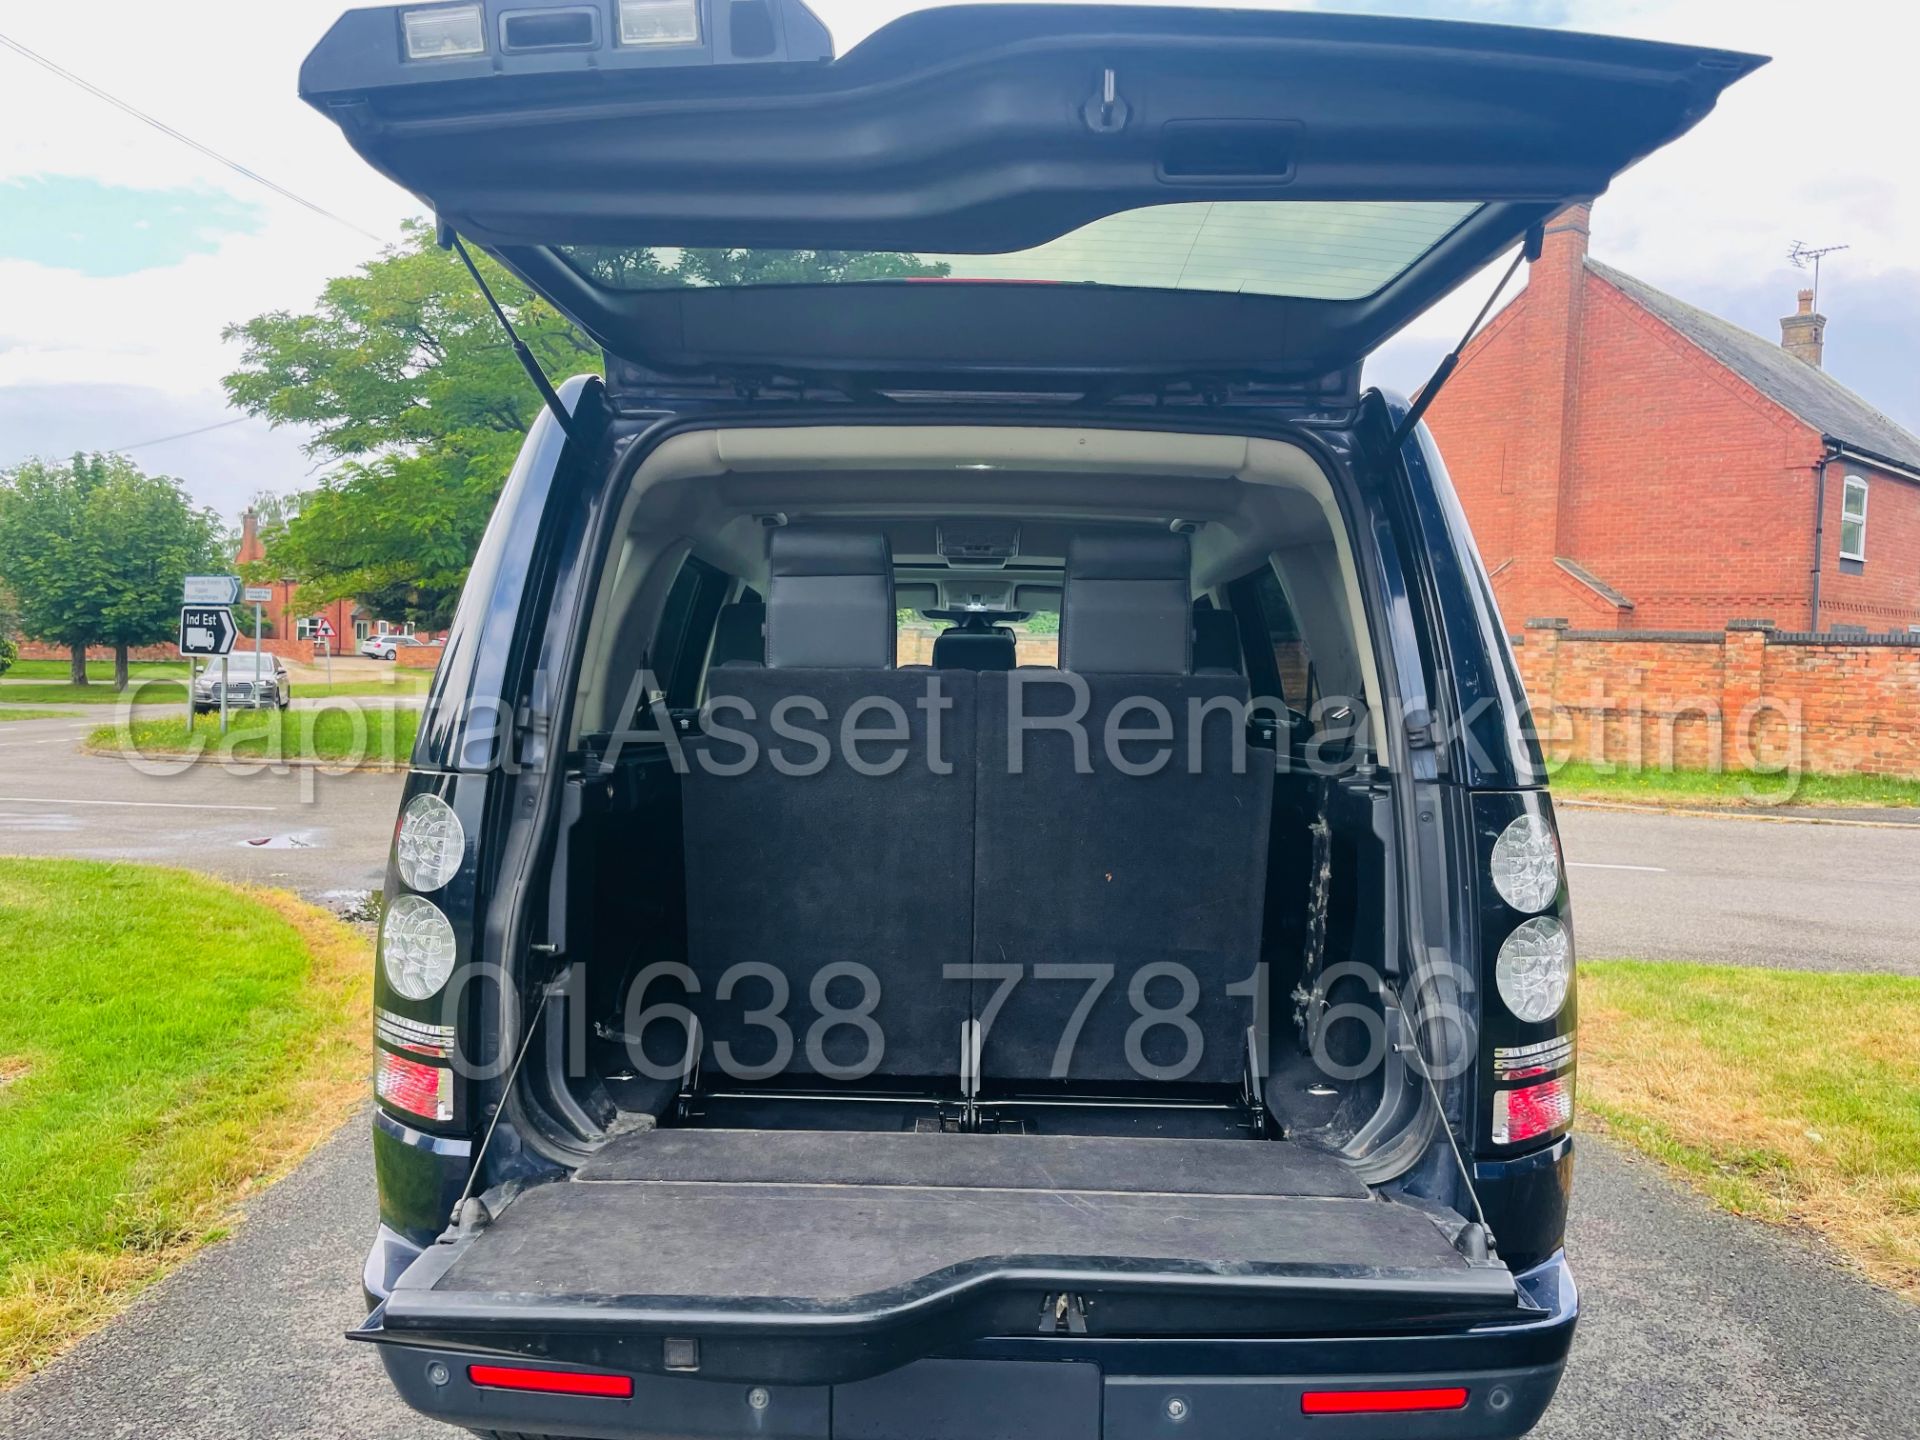 LAND ROVER DISCOVERY 4 *HSE* 7 SEATER SUV (2014 - NEW MODEL) '3.0 SDV6 - 255 BHP - 8 SPEED AUTO' - Image 31 of 61